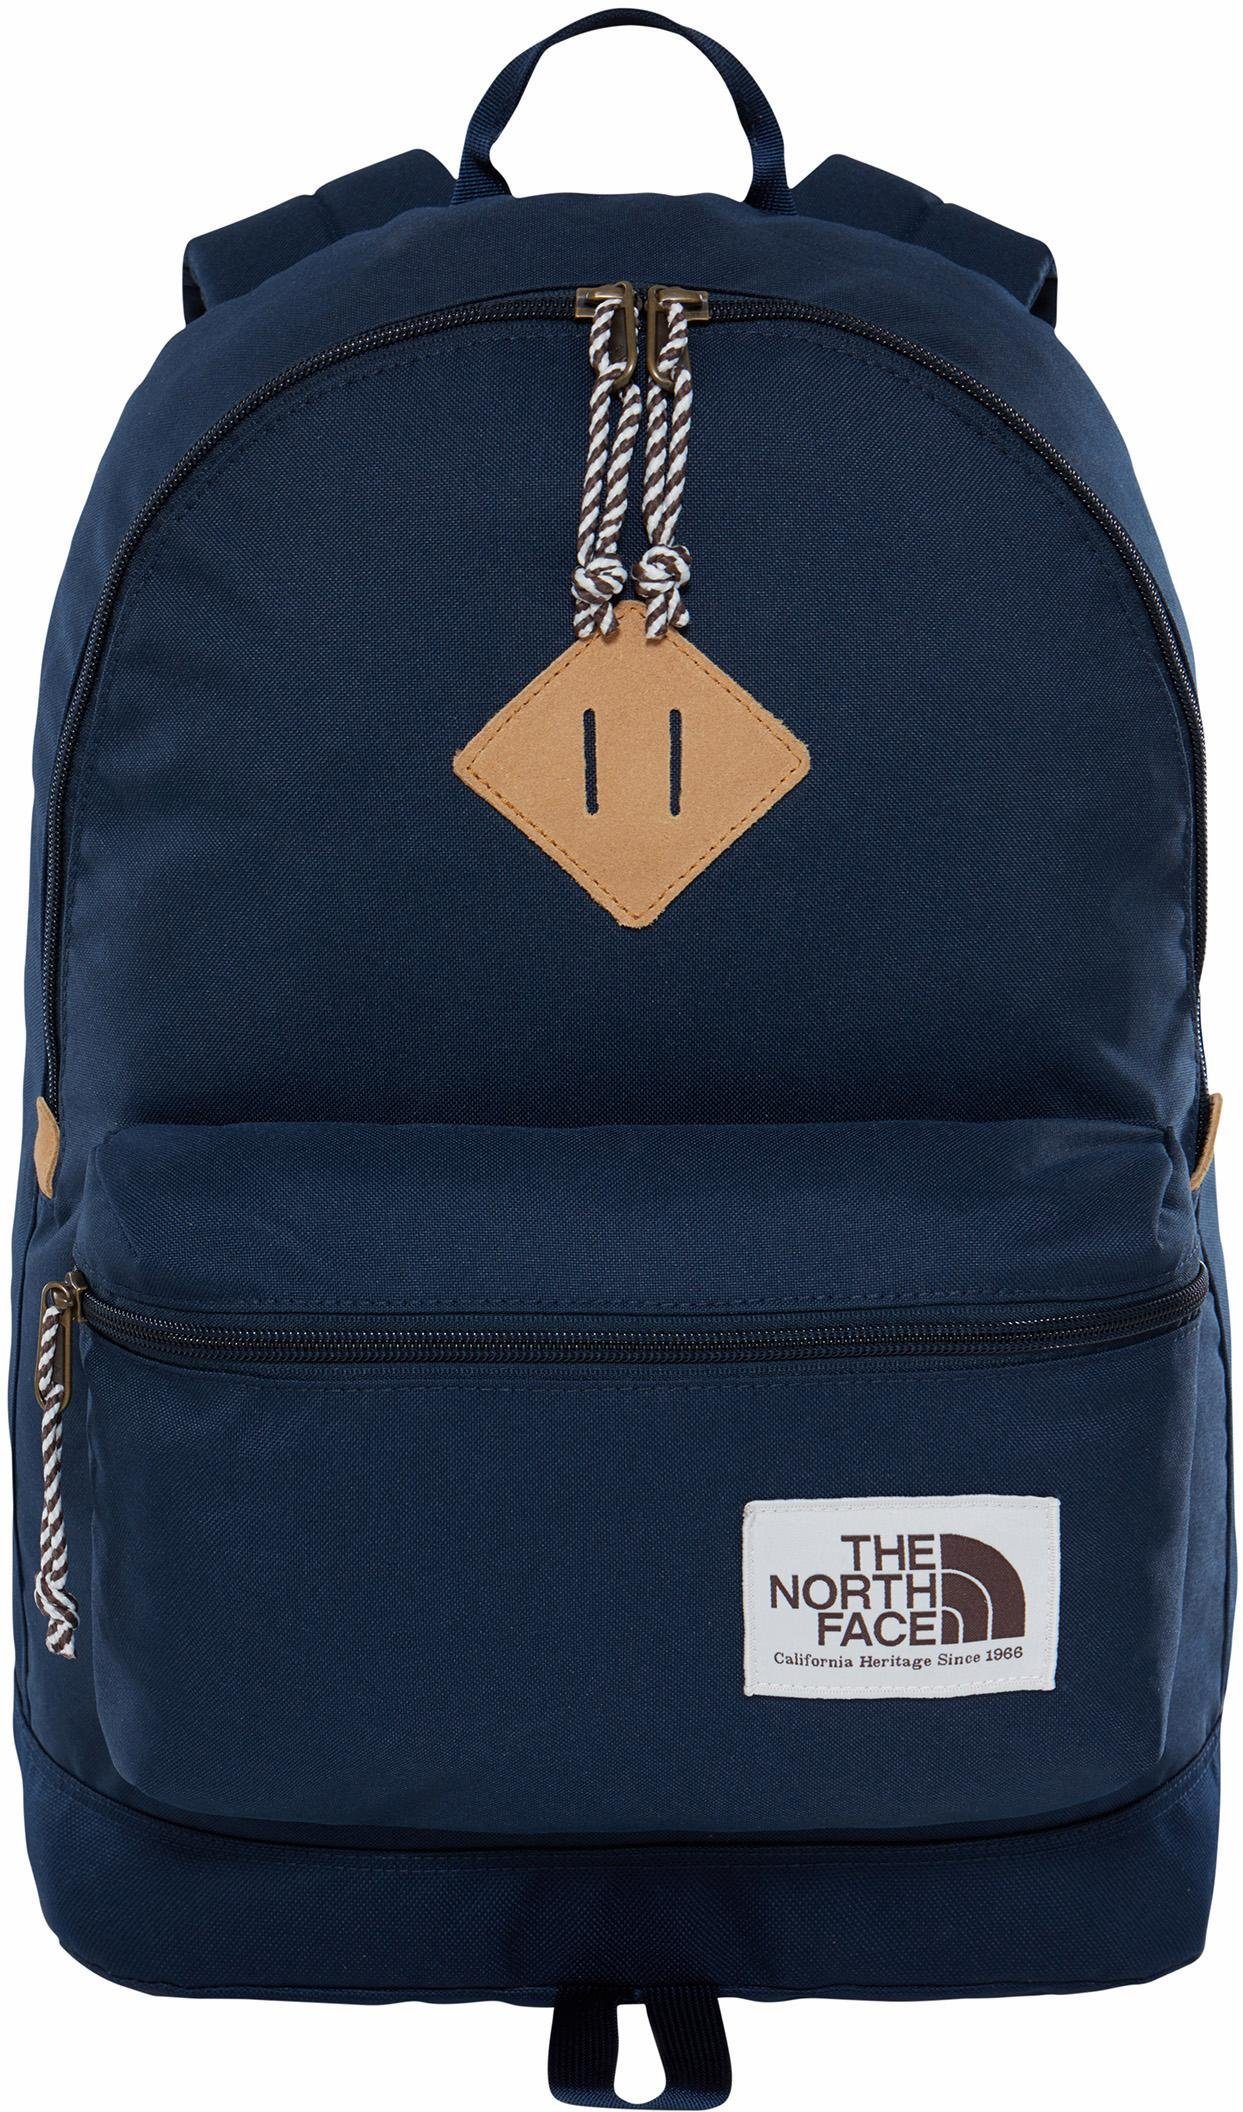 The North Face NU 15% KORTING: The North Face rugzak, Berkeley